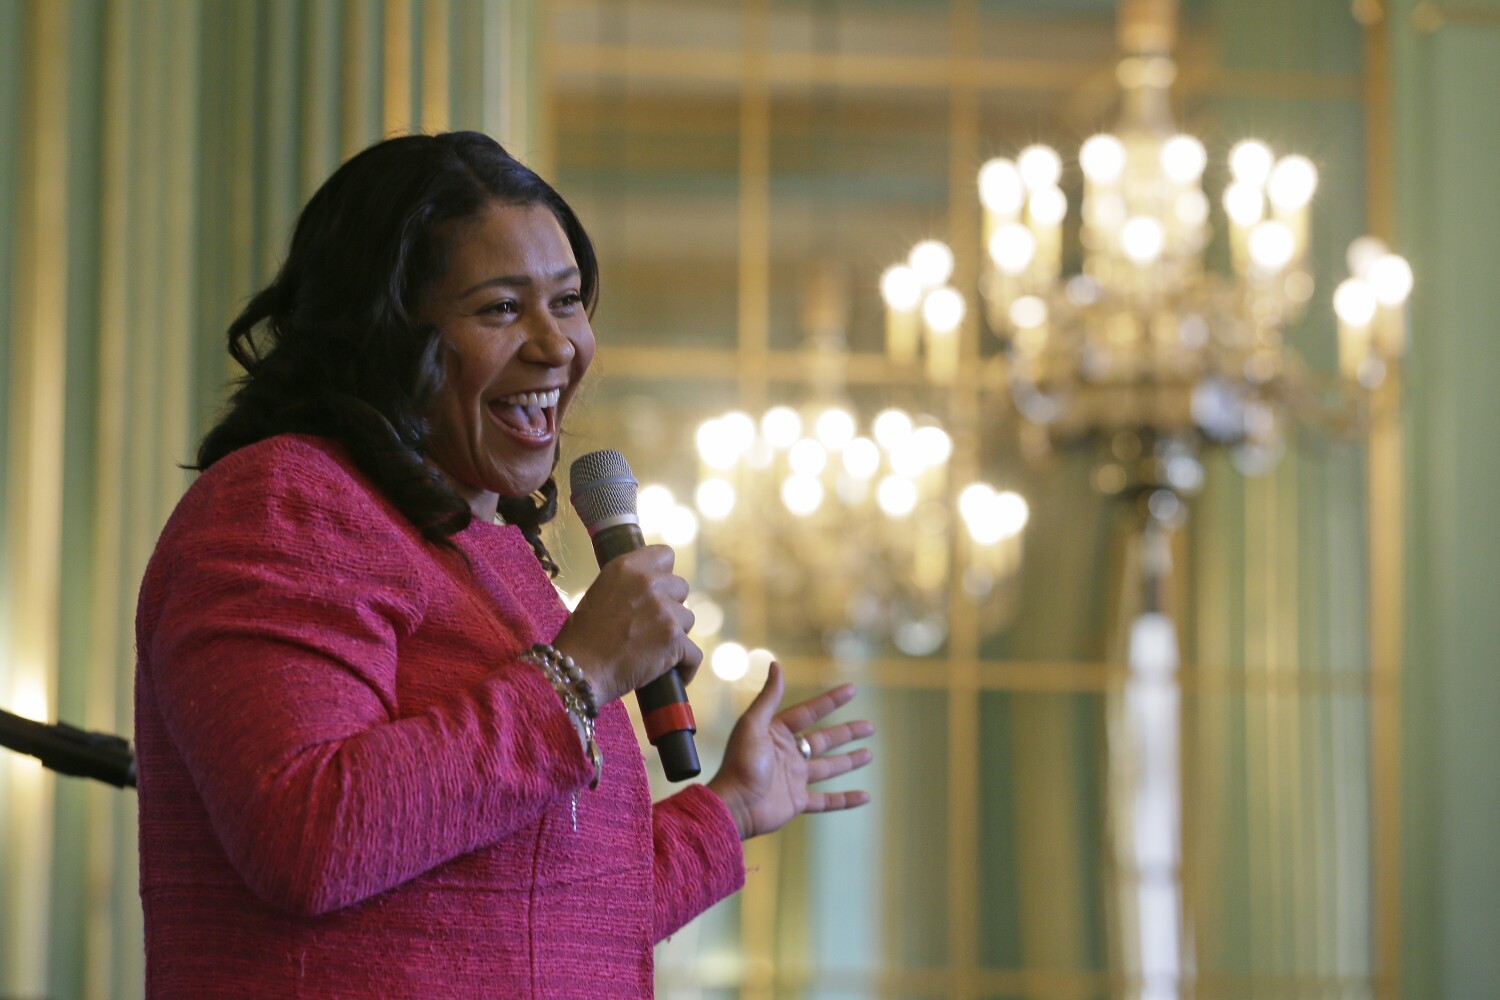 San Francisco Mayor London Breed, under fire for going maskless, attacks 'fun police'